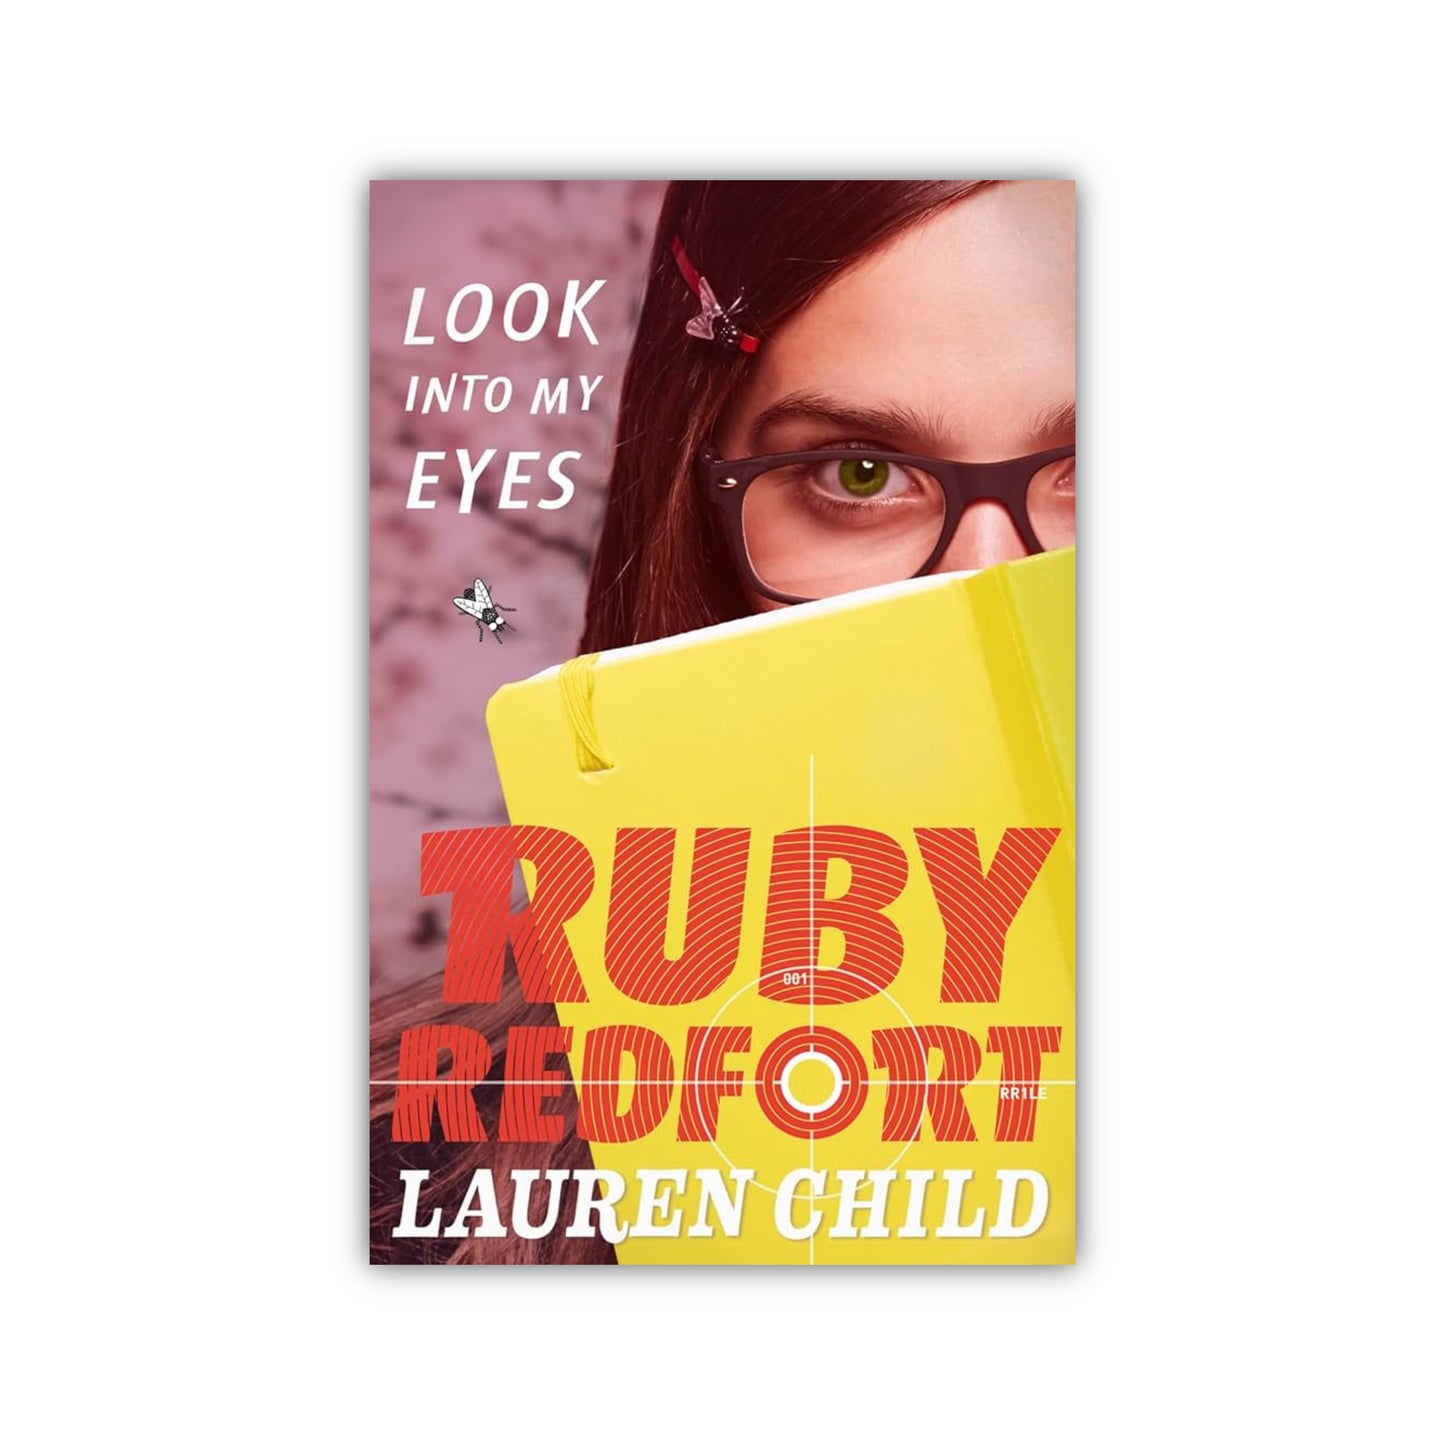 Look into my eyes (Ruby Redfort) by Lauren Child